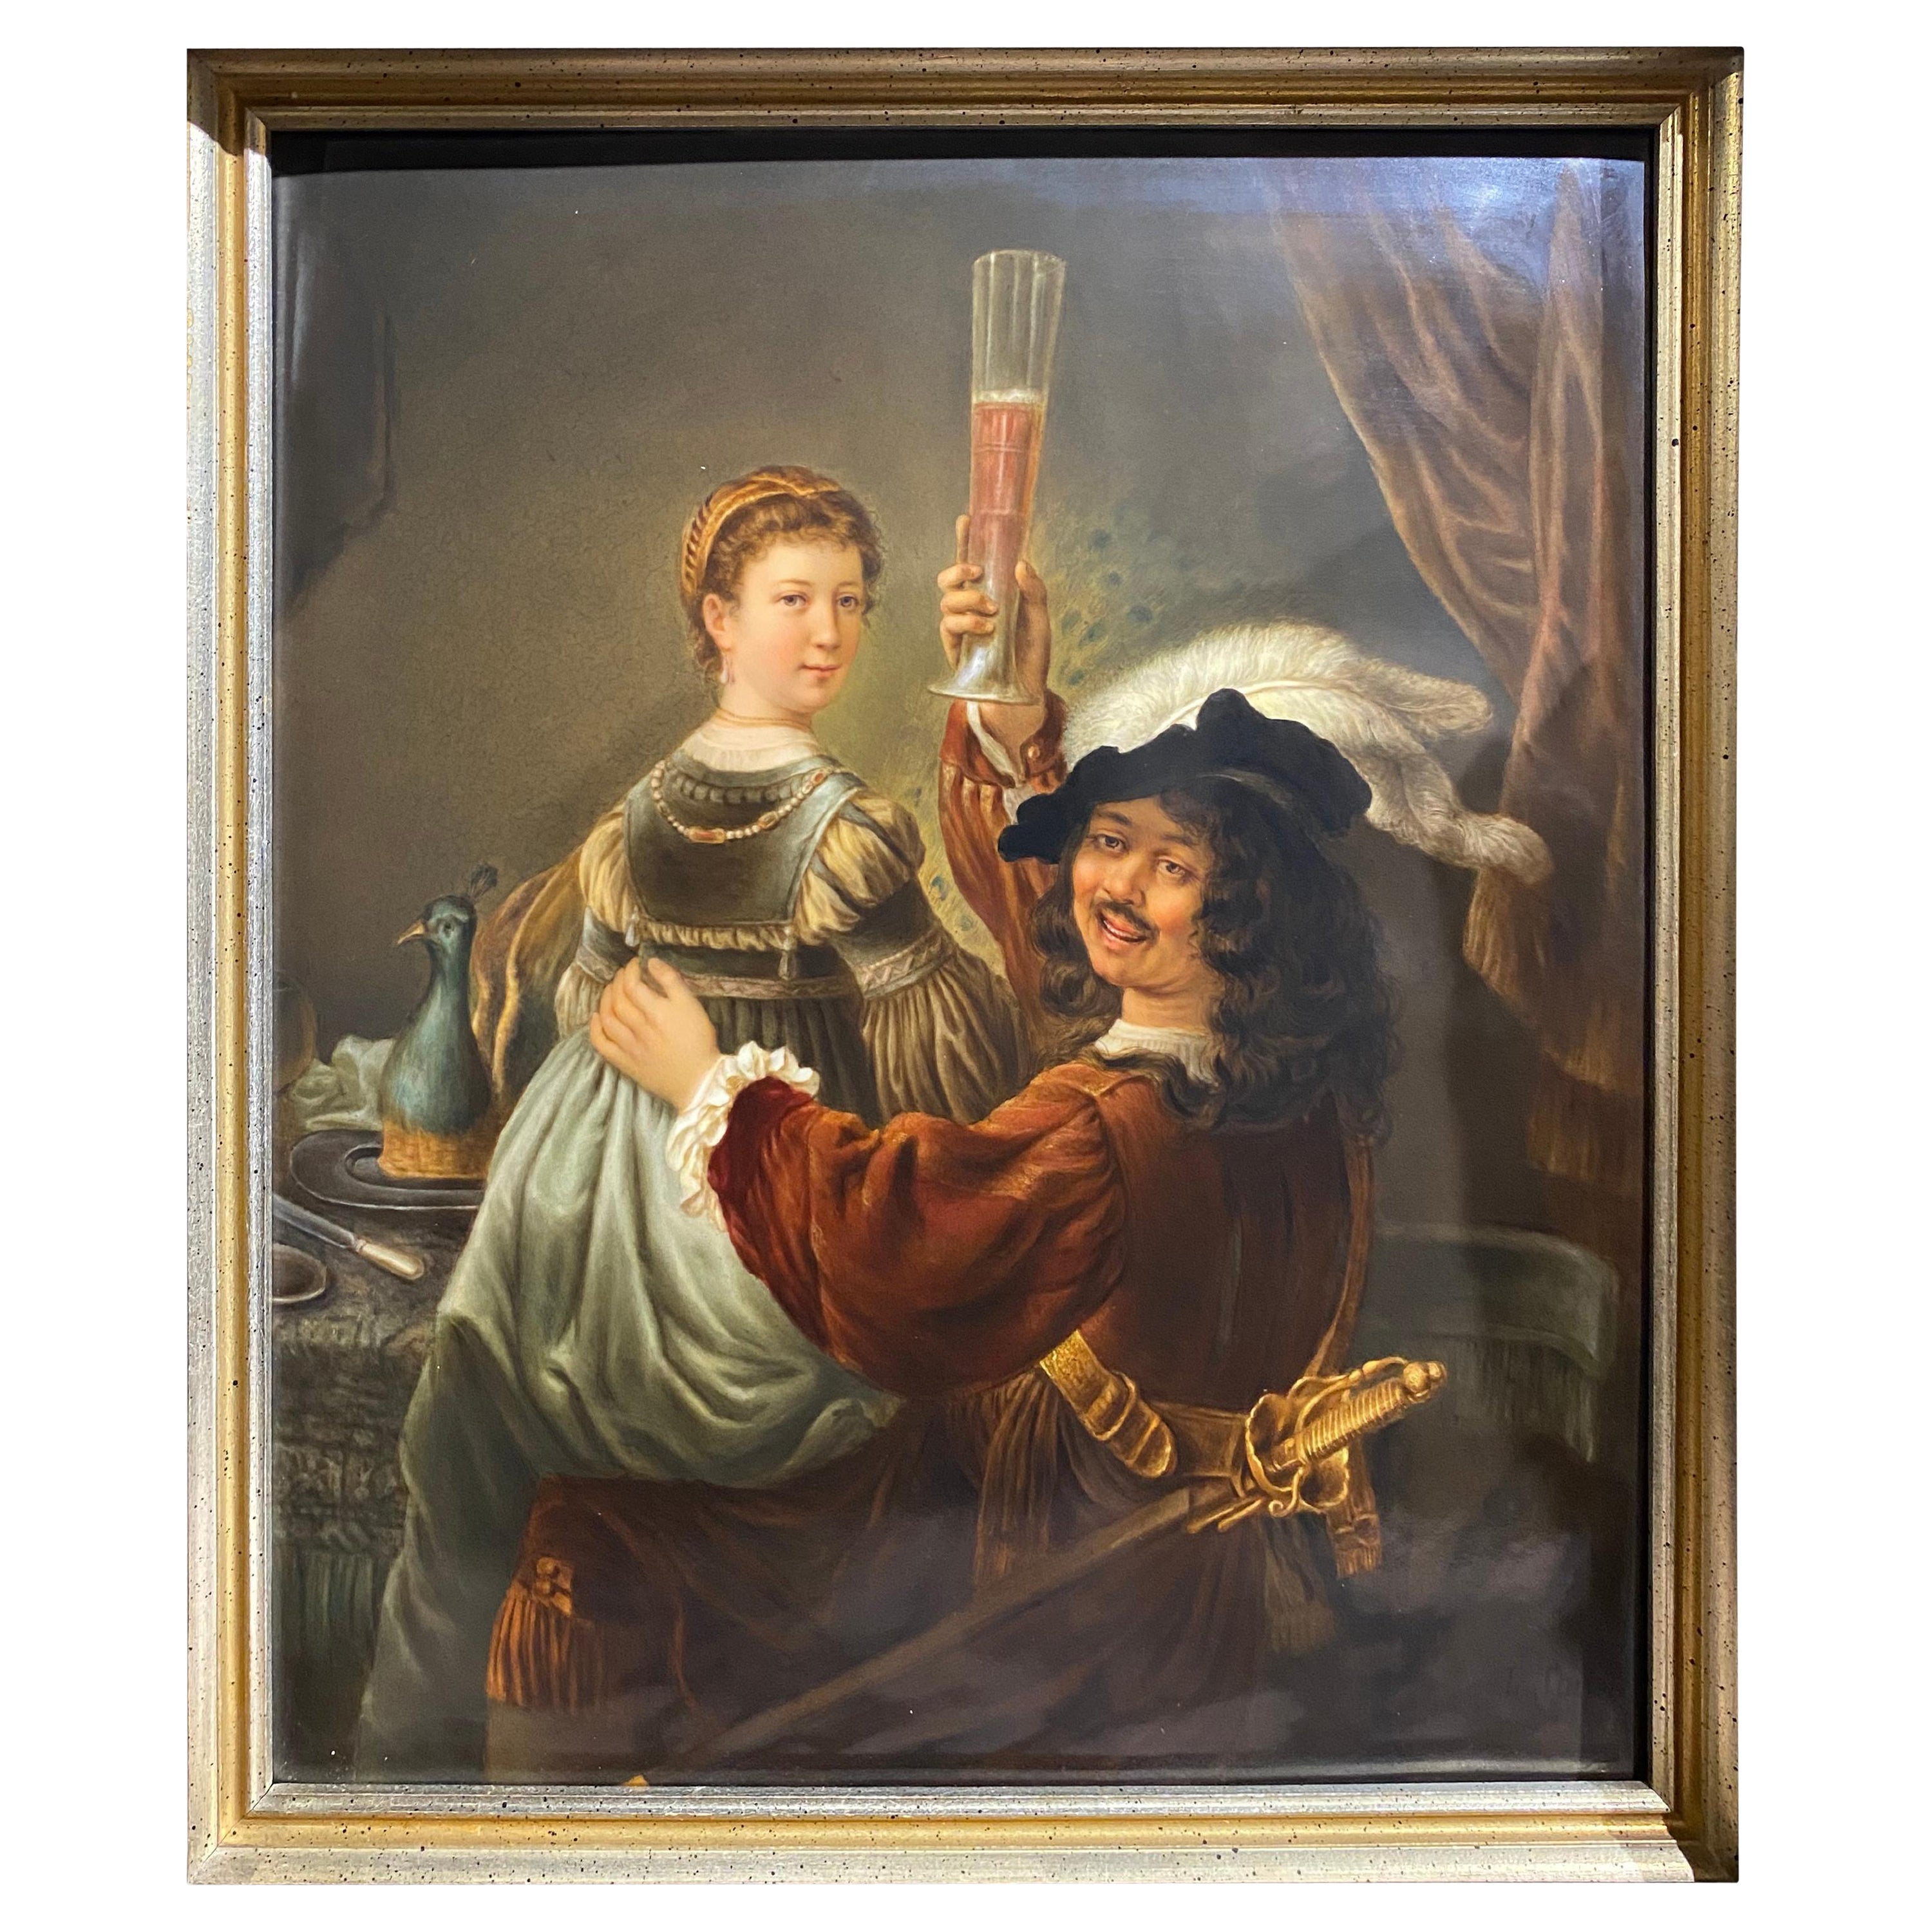 Large KPM Porcelain Plaque Depicting Rembrandt and His Wife For Sale